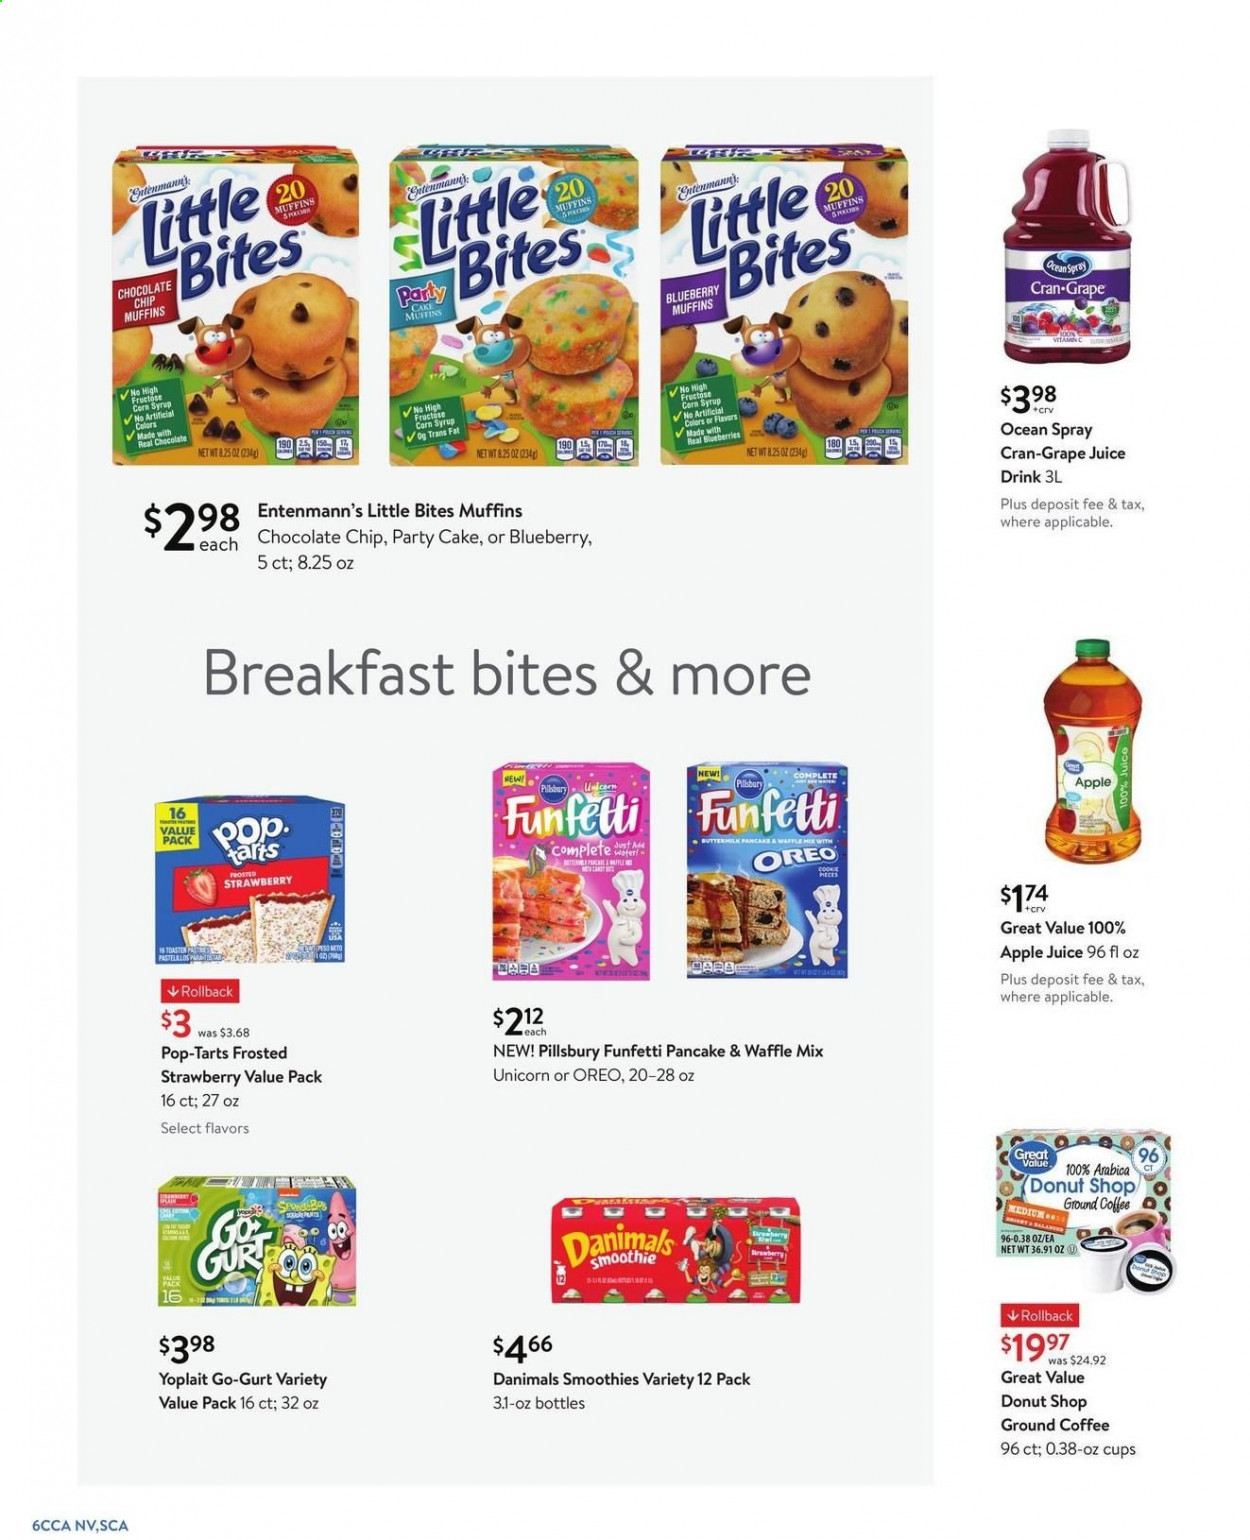 thumbnail - Walmart Flyer - 04/28/2021 - 06/01/2021 - Sales products - cake, muffin, Entenmann's, corn, blueberries, pancakes, Pillsbury, Oreo, Yoplait, Danimals, chocolate chips, Pop-Tarts, Little Bites, corn syrup, syrup, apple juice, juice, Cran-Grape, smoothie, coffee, ground coffee, cup. Page 6.